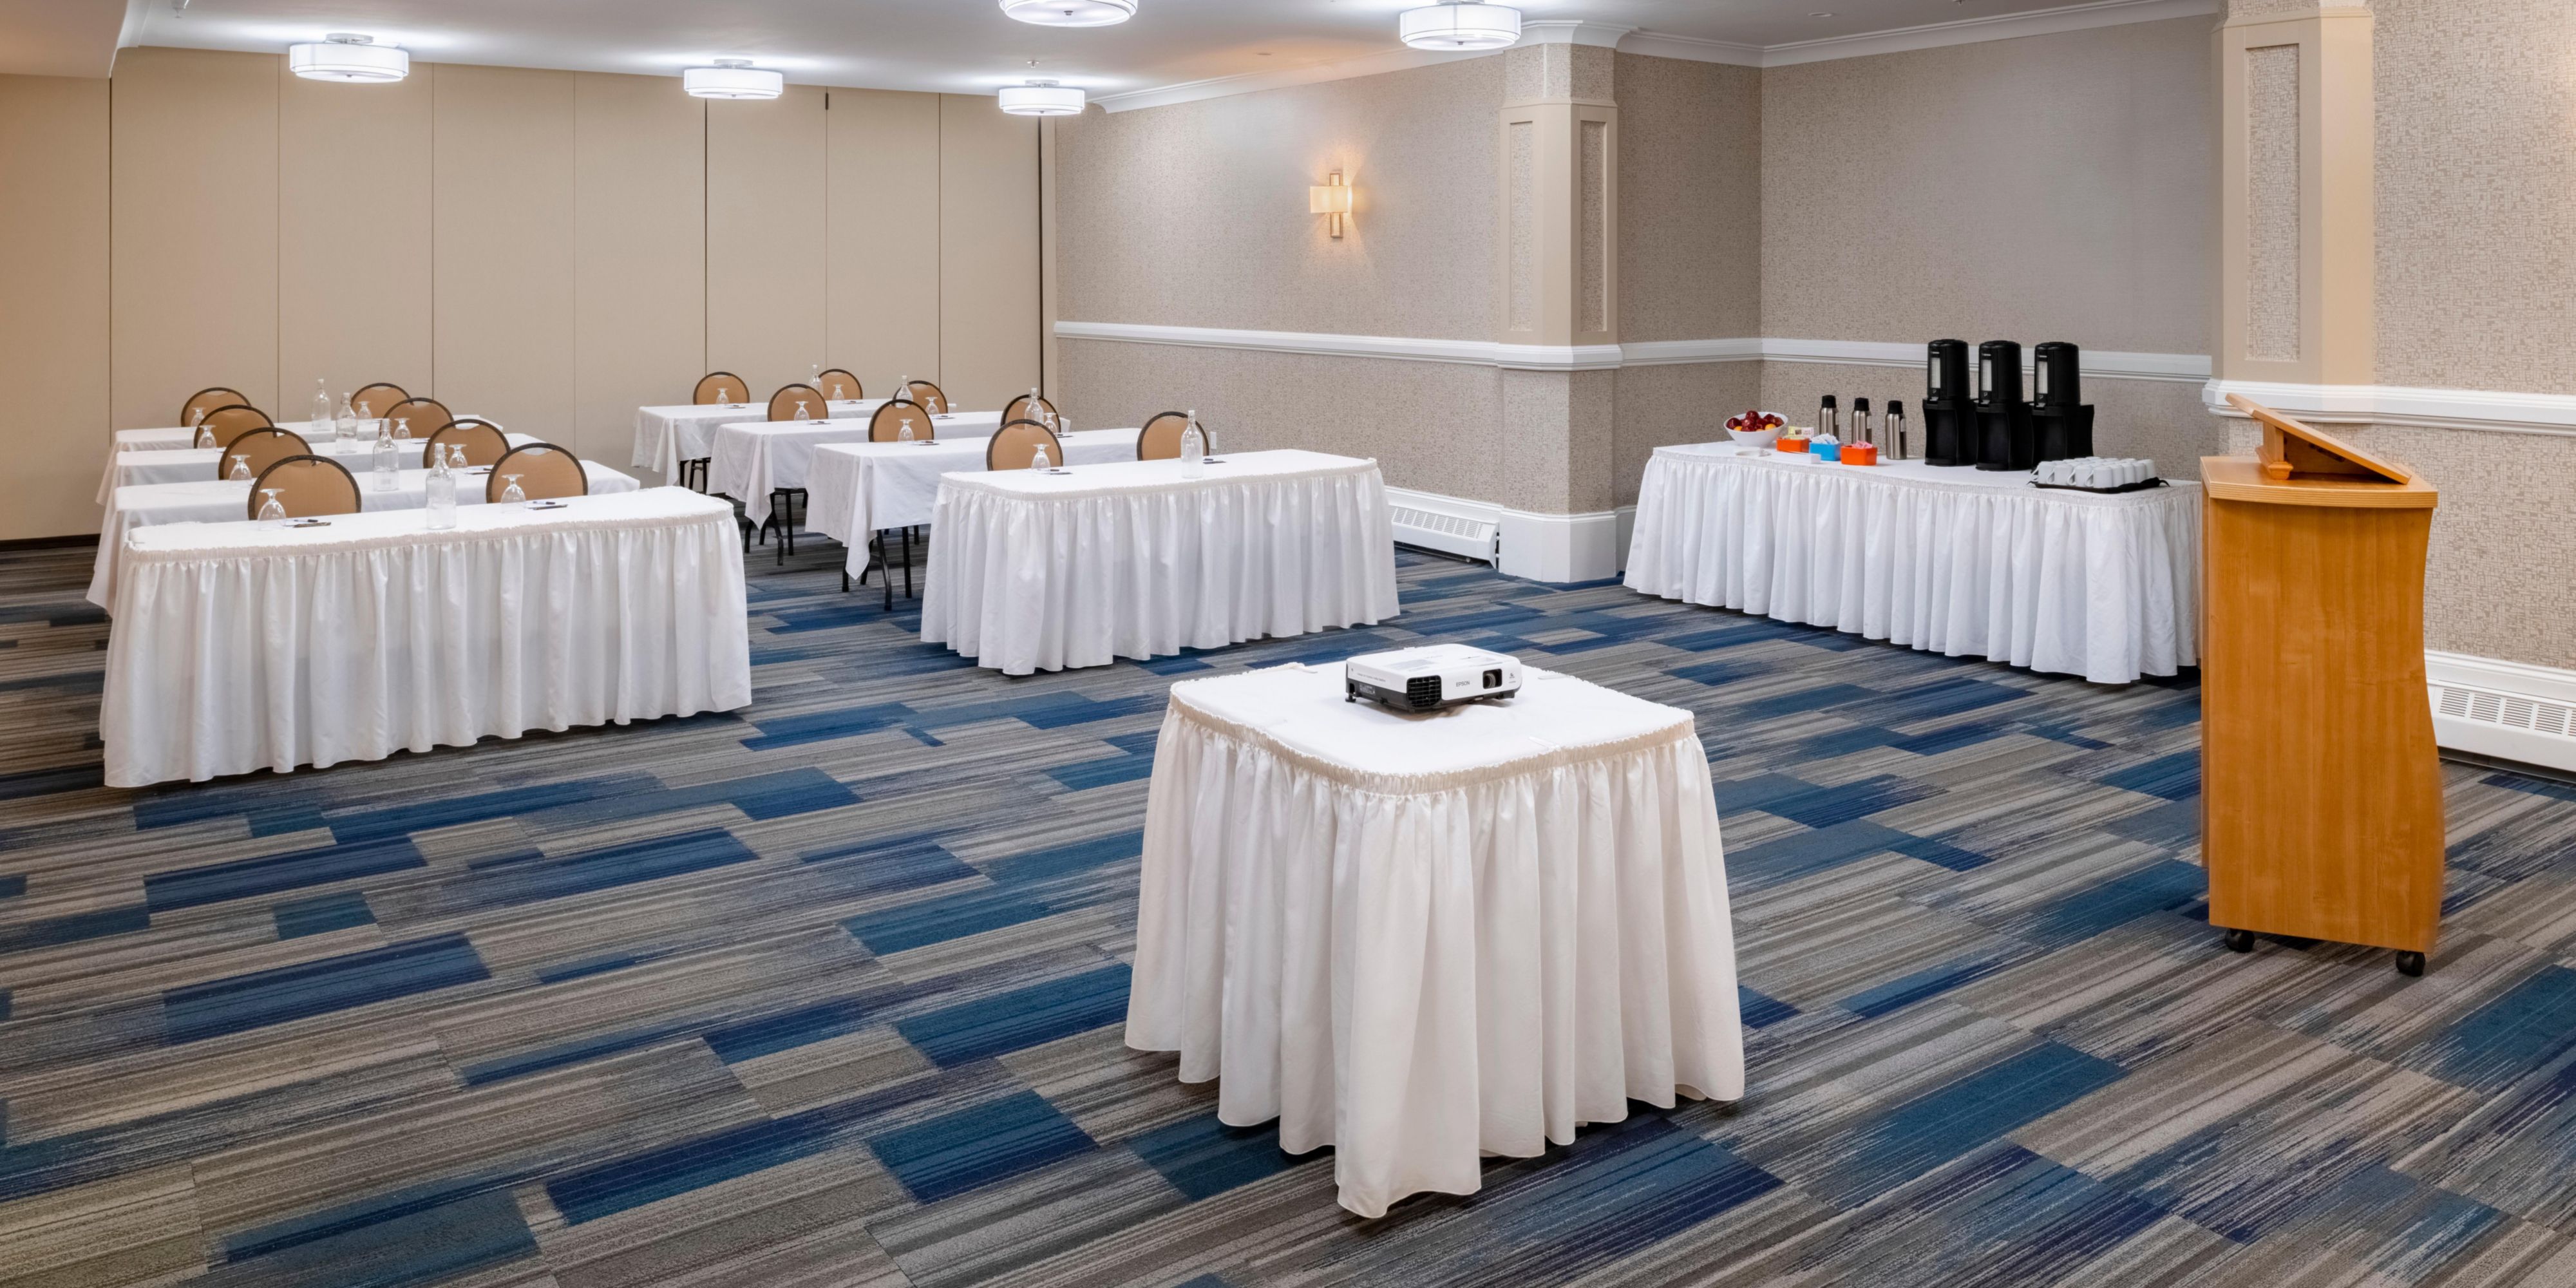 Host corporate meetings, government functions, and social gatherings at our Halifax–Bedford hotel with recently renovated venues for up to 150 guests. Connect and collaborate in style with cutting-edge audiovisual facilities and catering services. Enjoy free Wi-Fi, free parking, and our complimentary breakfast. 